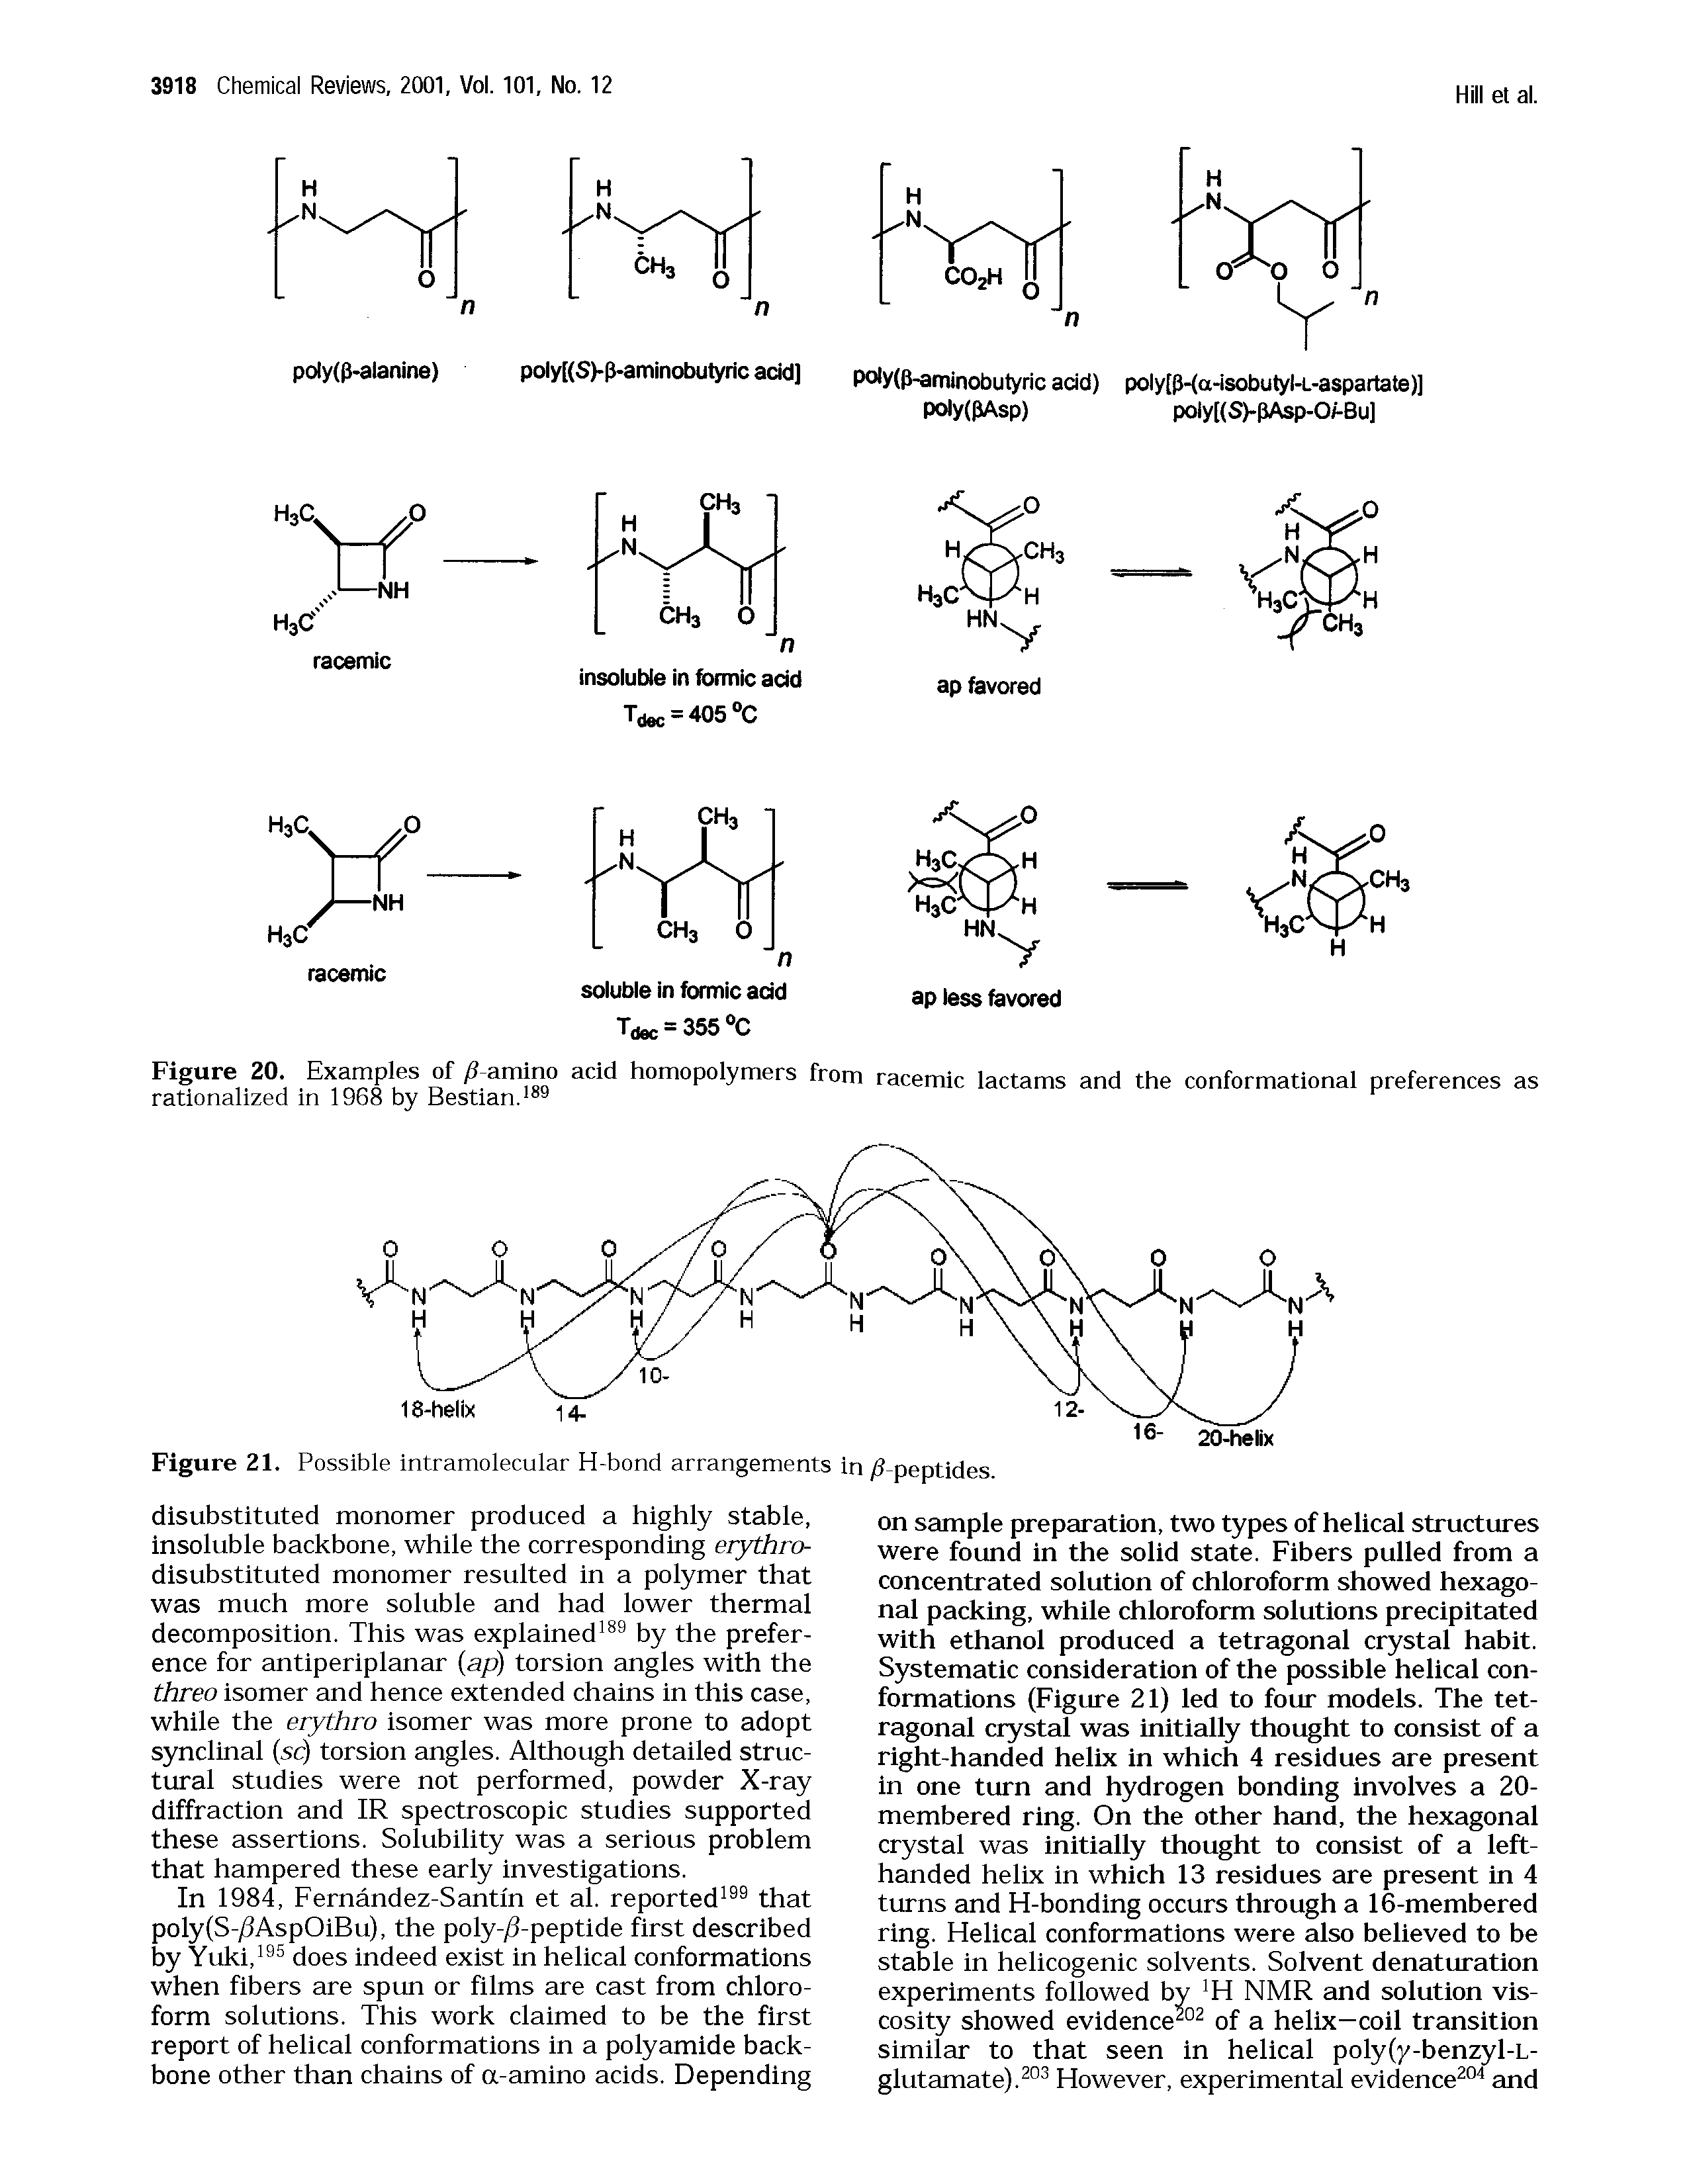 Figure 20. Examples of/ amino acid homopolymers from racemic lactams and the conformational preferences as rationalized in 1968 by Bestian.lsy...